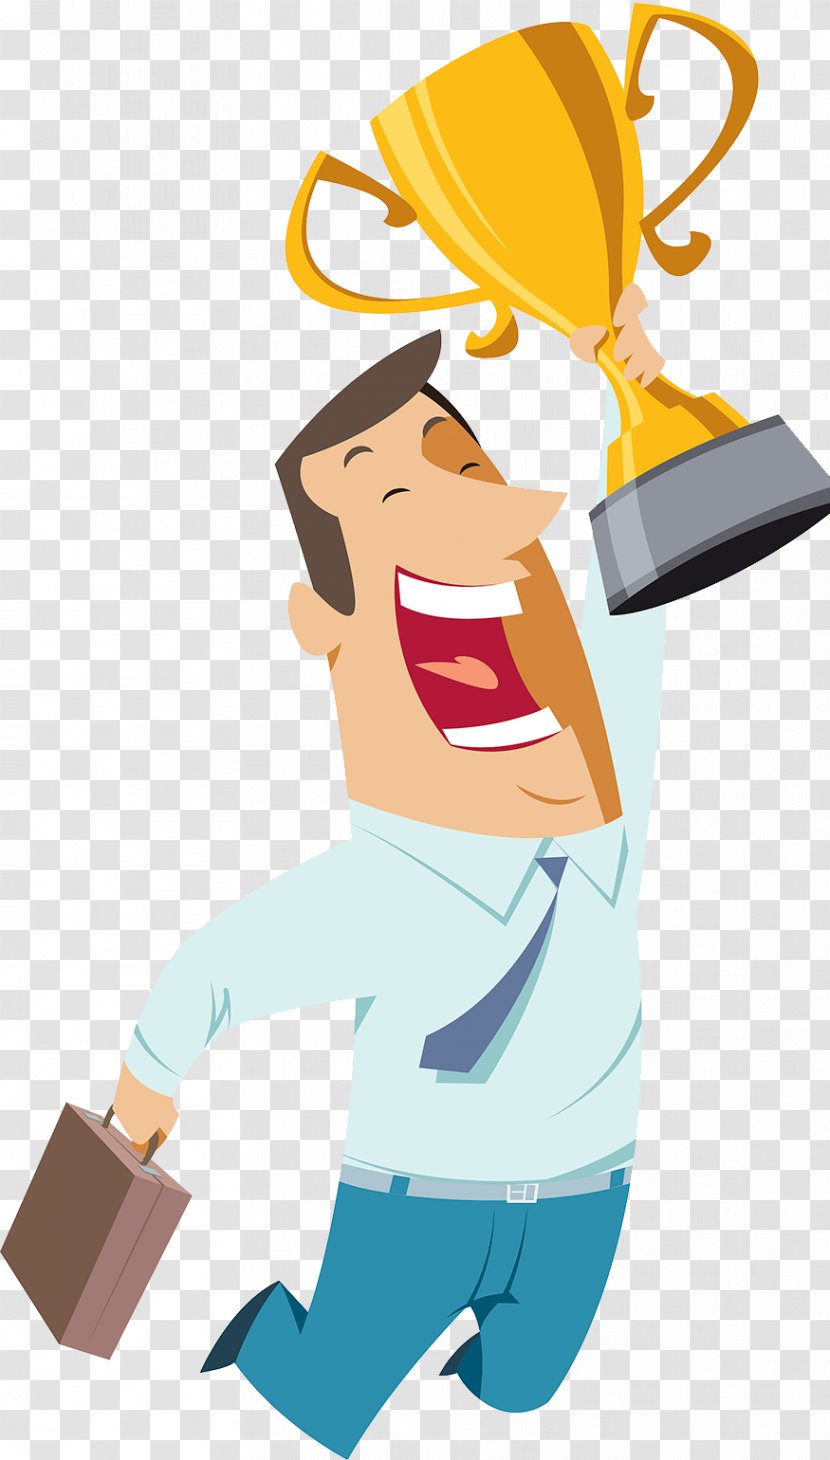 Drawing Illustration - Finger - Excited To Accept The Award Transparent PNG